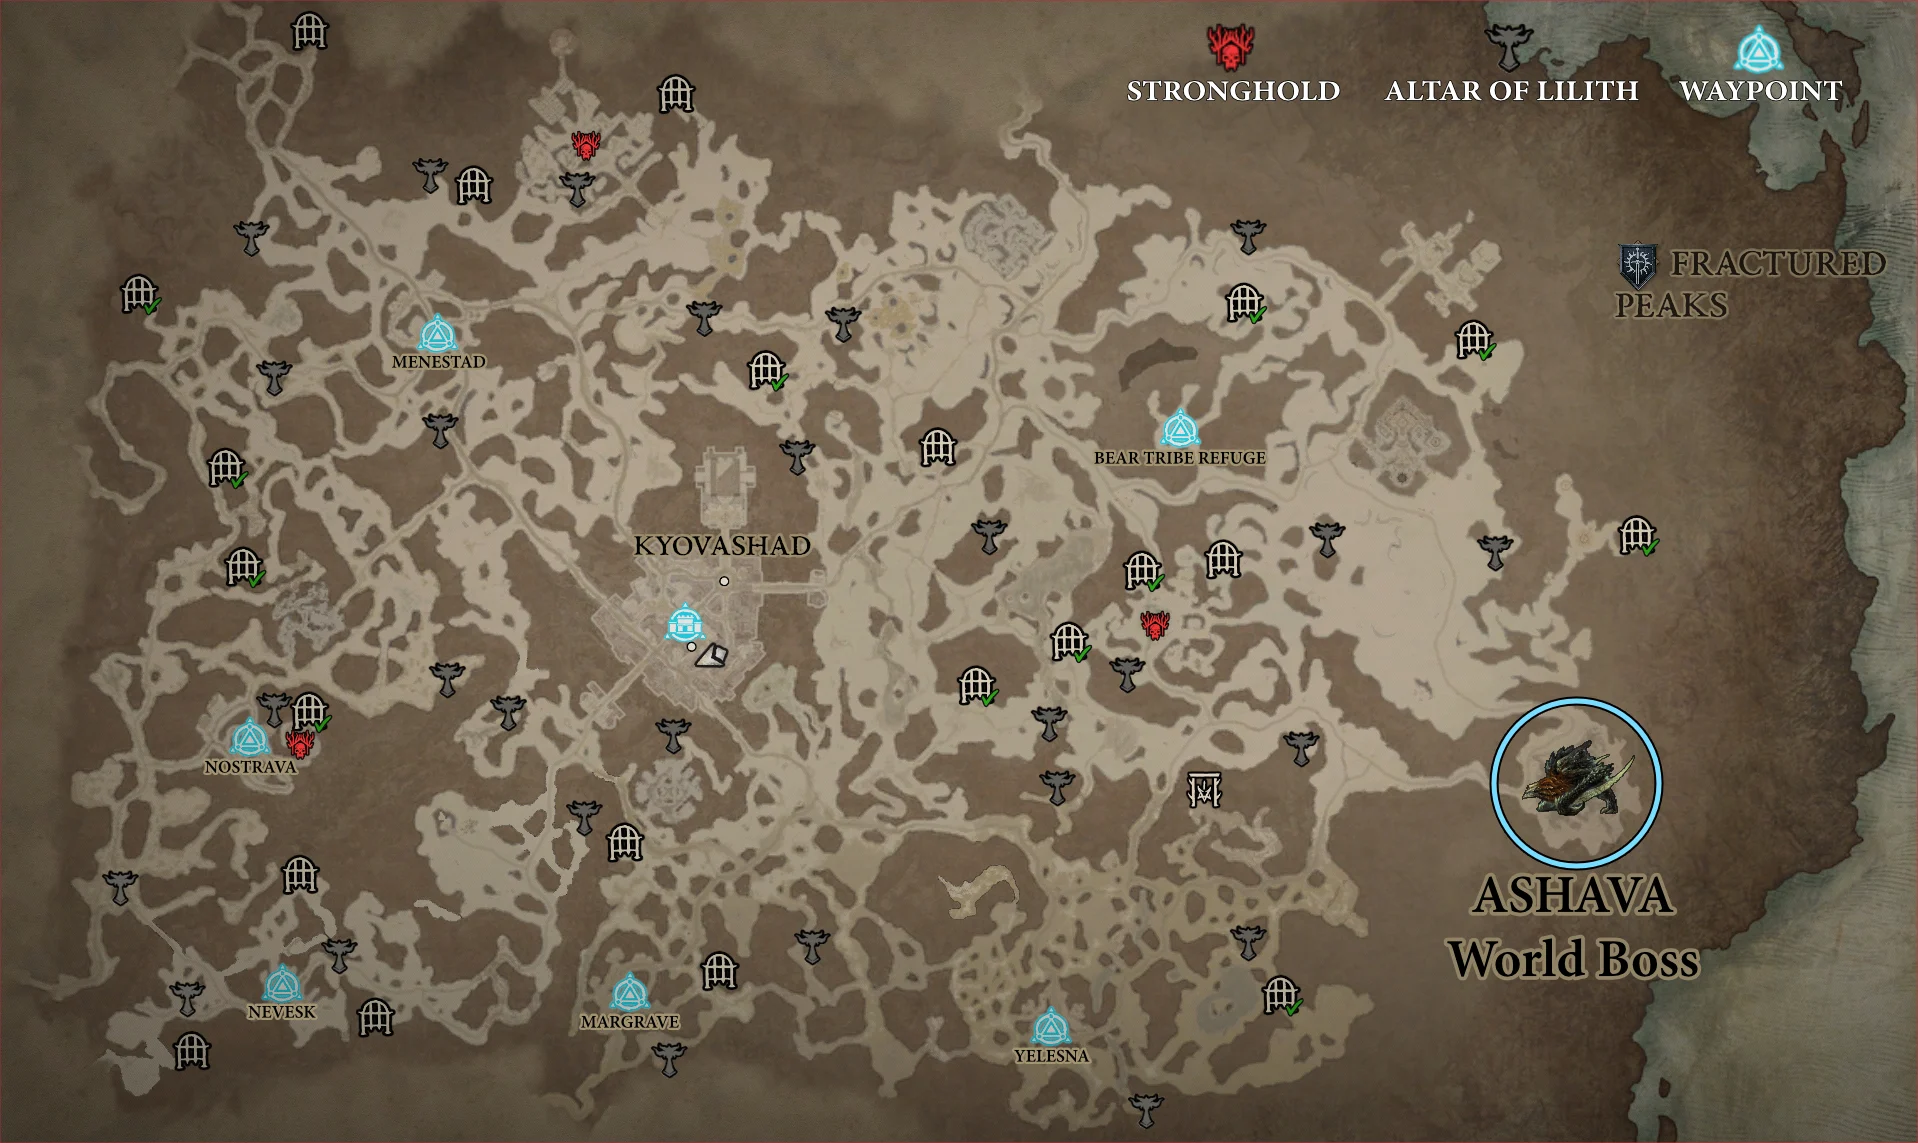 Fractured Peaks Altar of Lillilth, Waypoins, Strongholds, World Boss, Renown